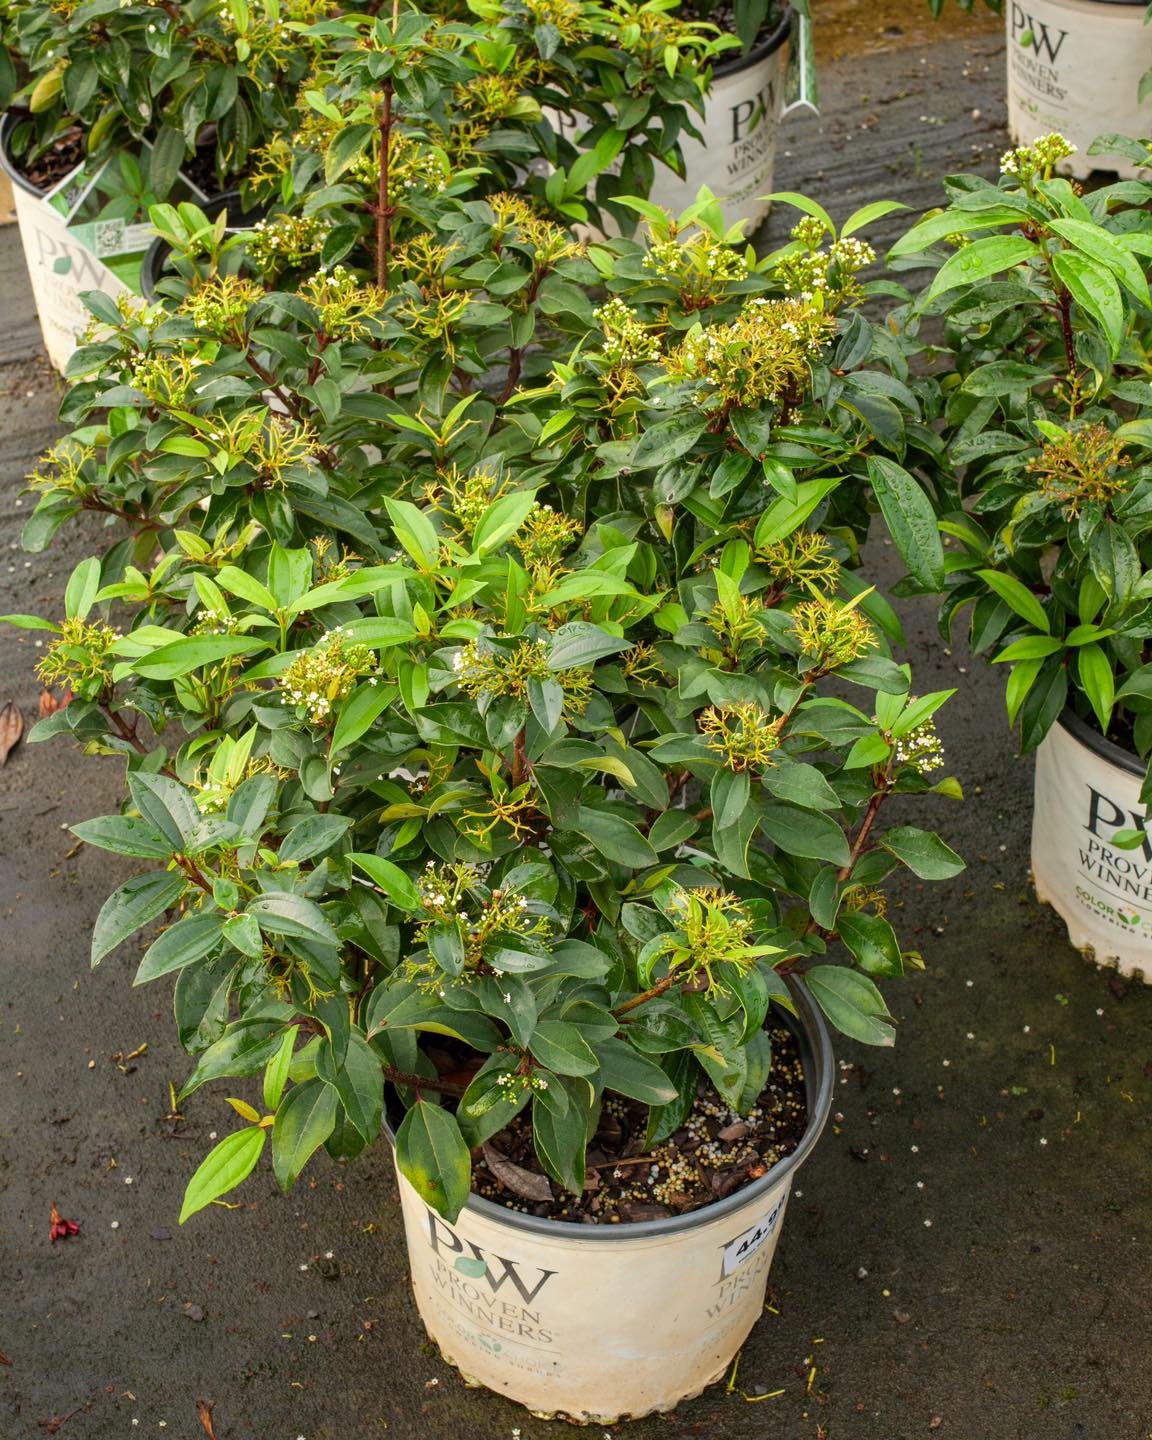 Now this is a cool pair! @provenwinners have created the Yin and Yang David Viburnum! They're a hybrid of V. David I and V. propinquum. They require limited pruning. Yin reaches 2-4' tall and 4' wide and Yang reaches 2' tall and 4' wide. You need bot